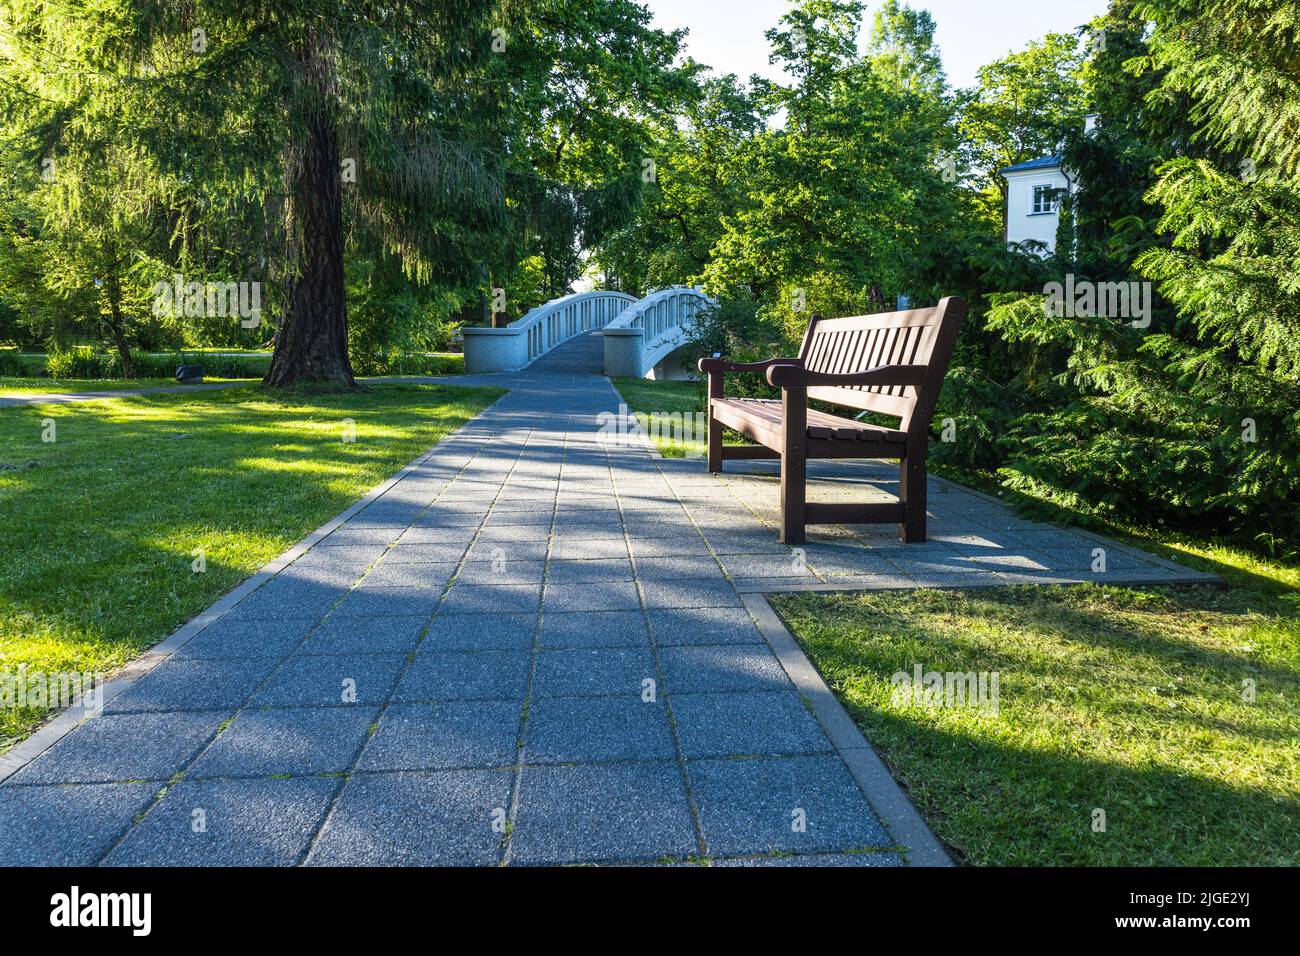 Park in a quiet place to rest. Summer in the city Stock Photo